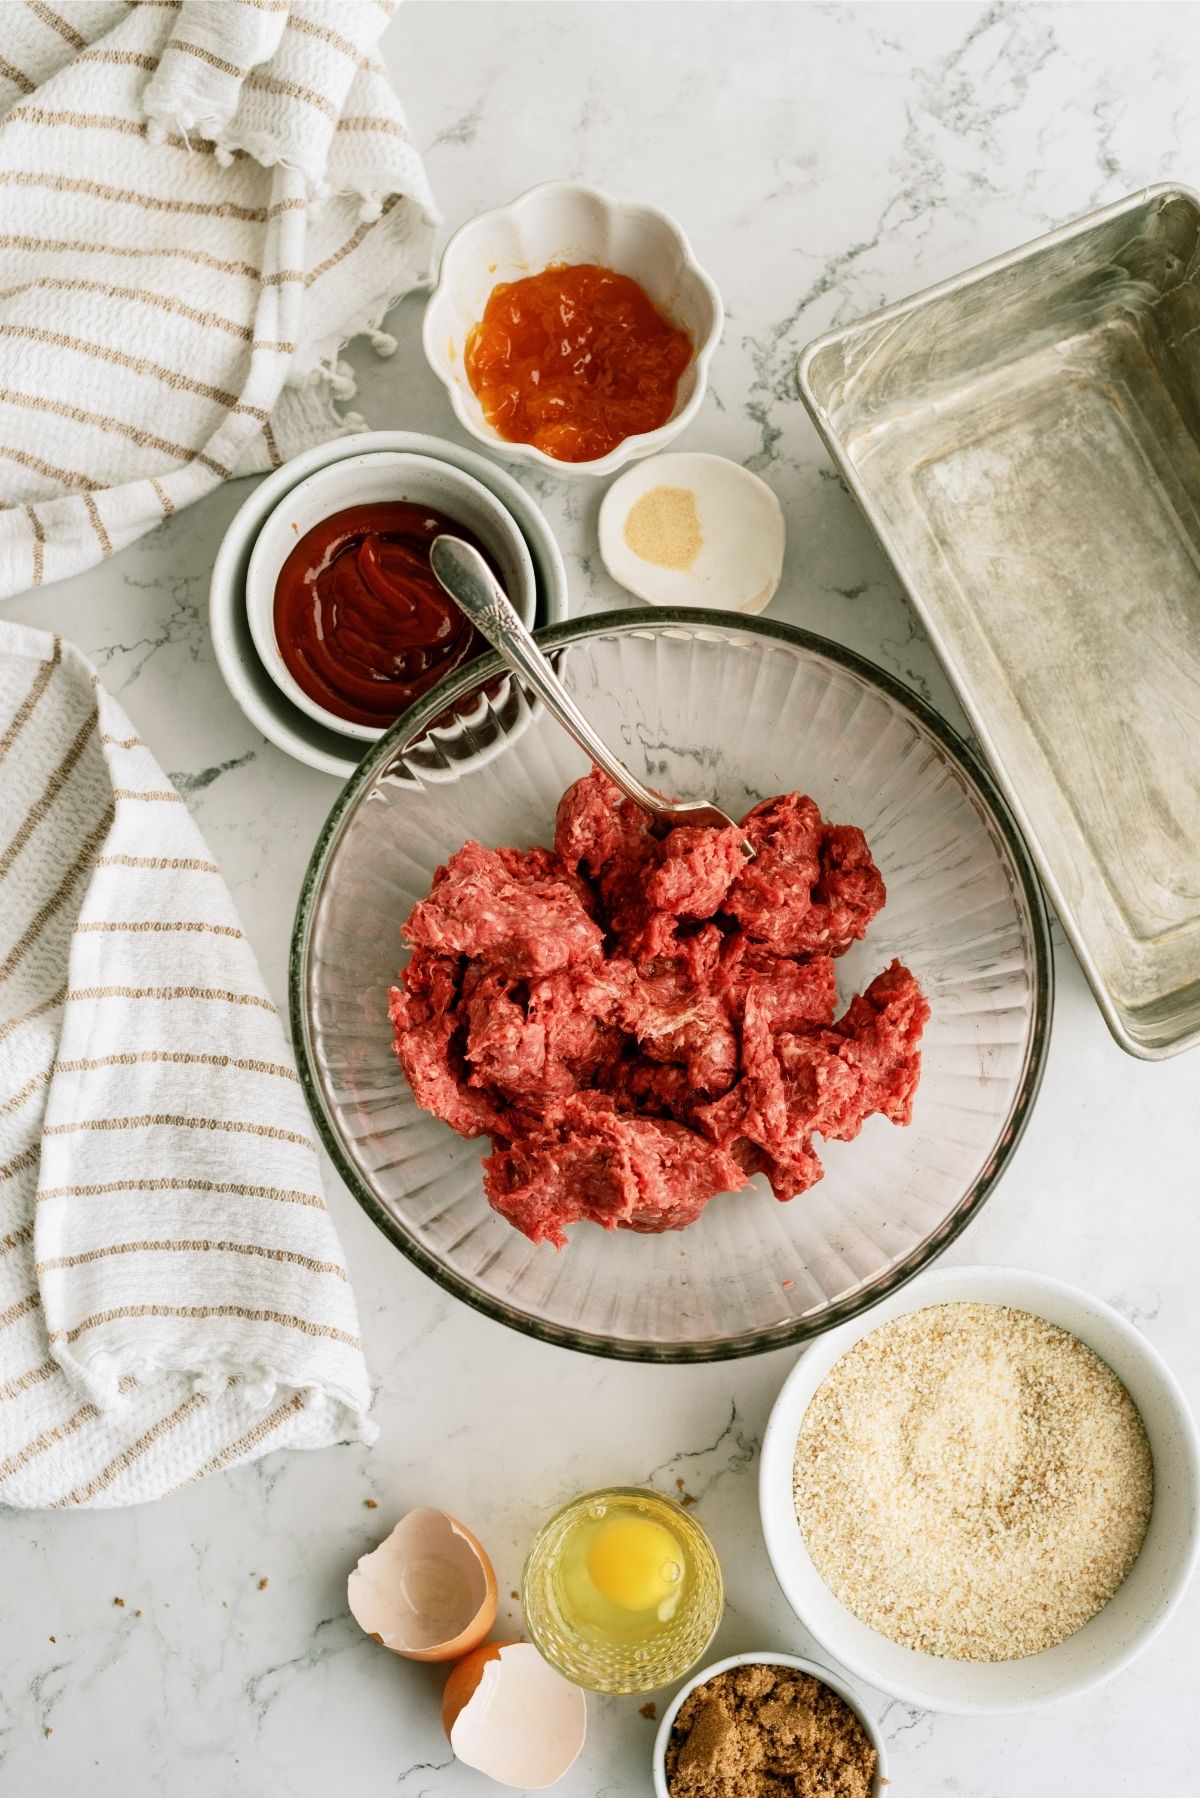 Ingredients for Sweet and Tangy Meatloaf Recipe